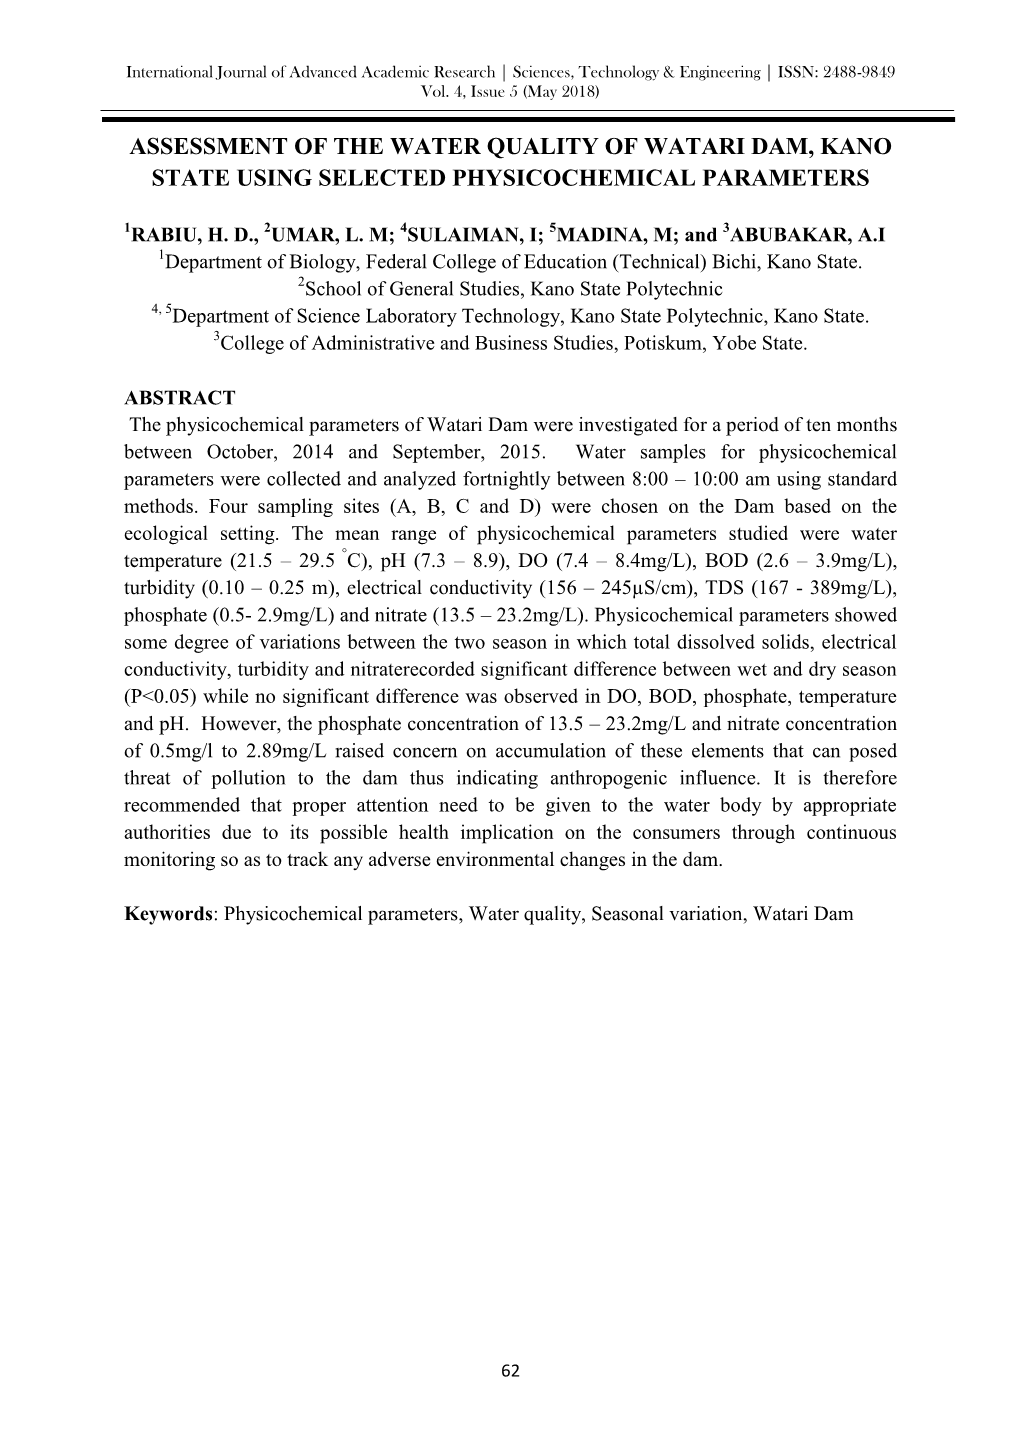 Assessment of the Water Quality of Watari Dam, Kano State Using Selected Physicochemical Parameters